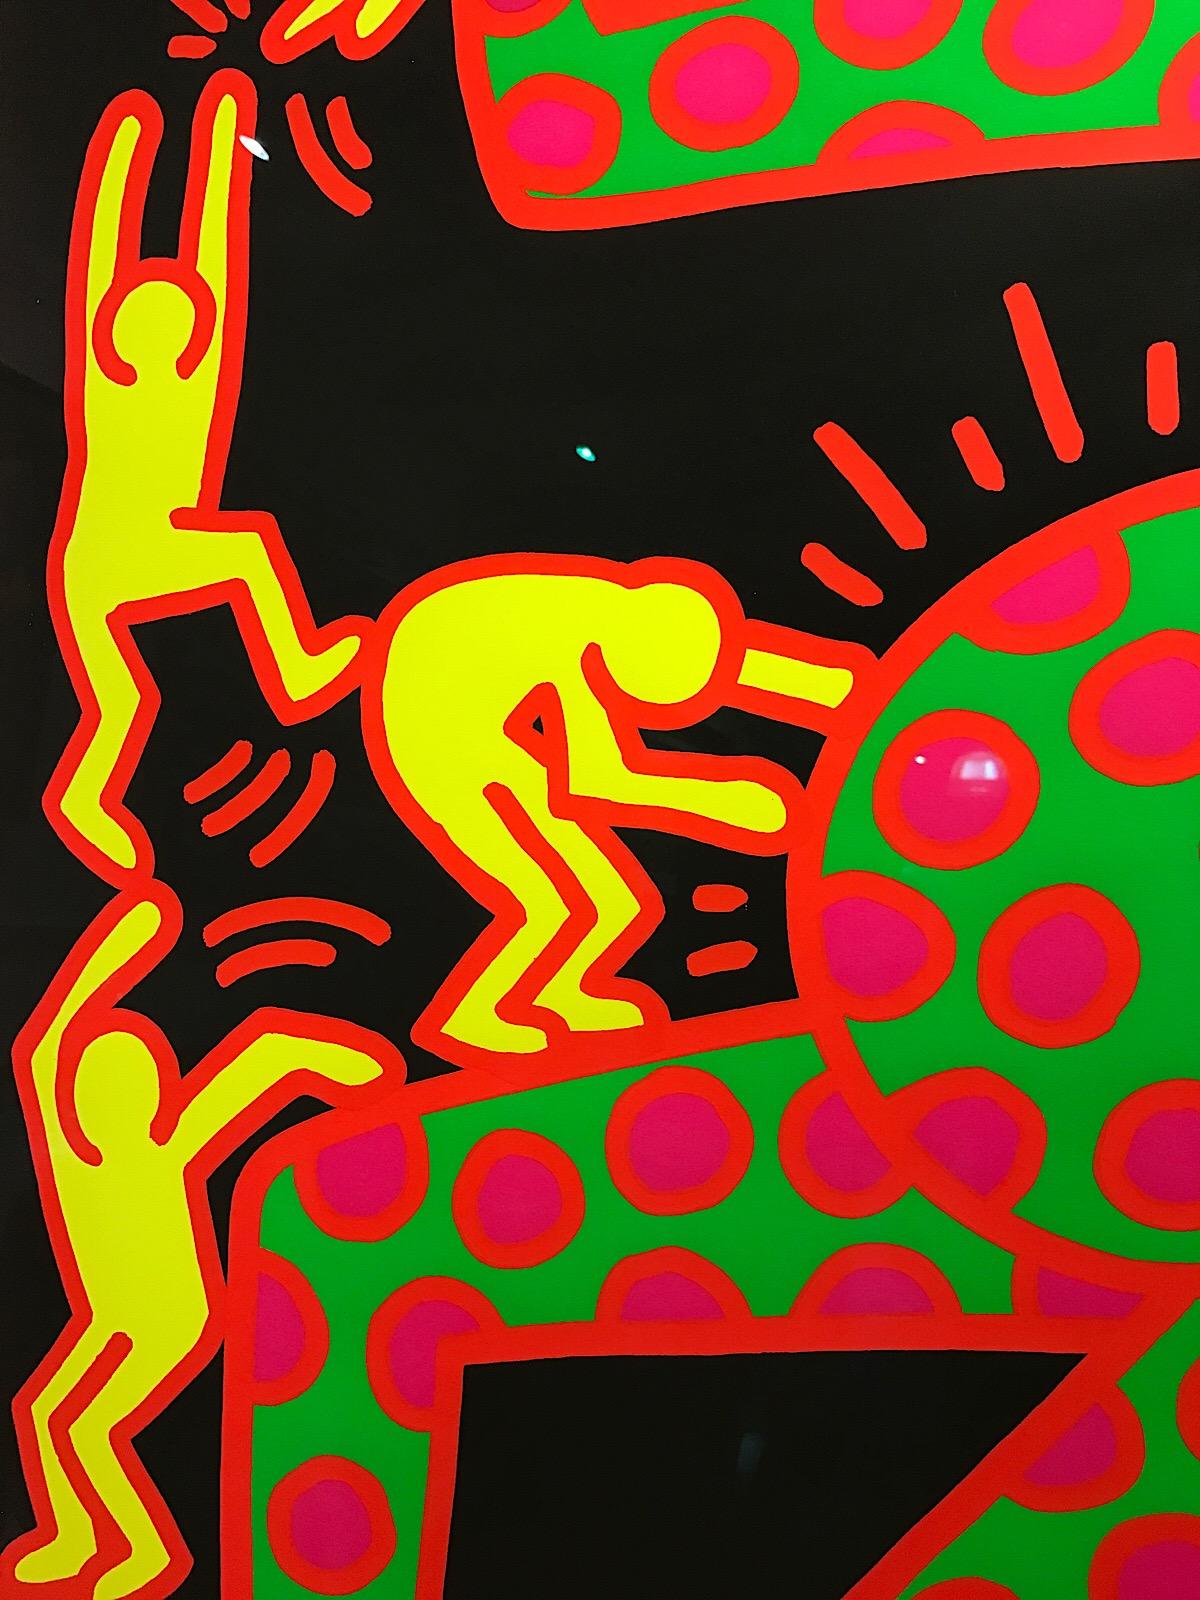 Silkscreen on paper, edition of 100.

This amazing piece is handsigned by Keith Haring and framed. Keith Haring was a huge influential force in the American art scene during the 1980s along with Andy Warhol an this is the perfect piece for a Haring